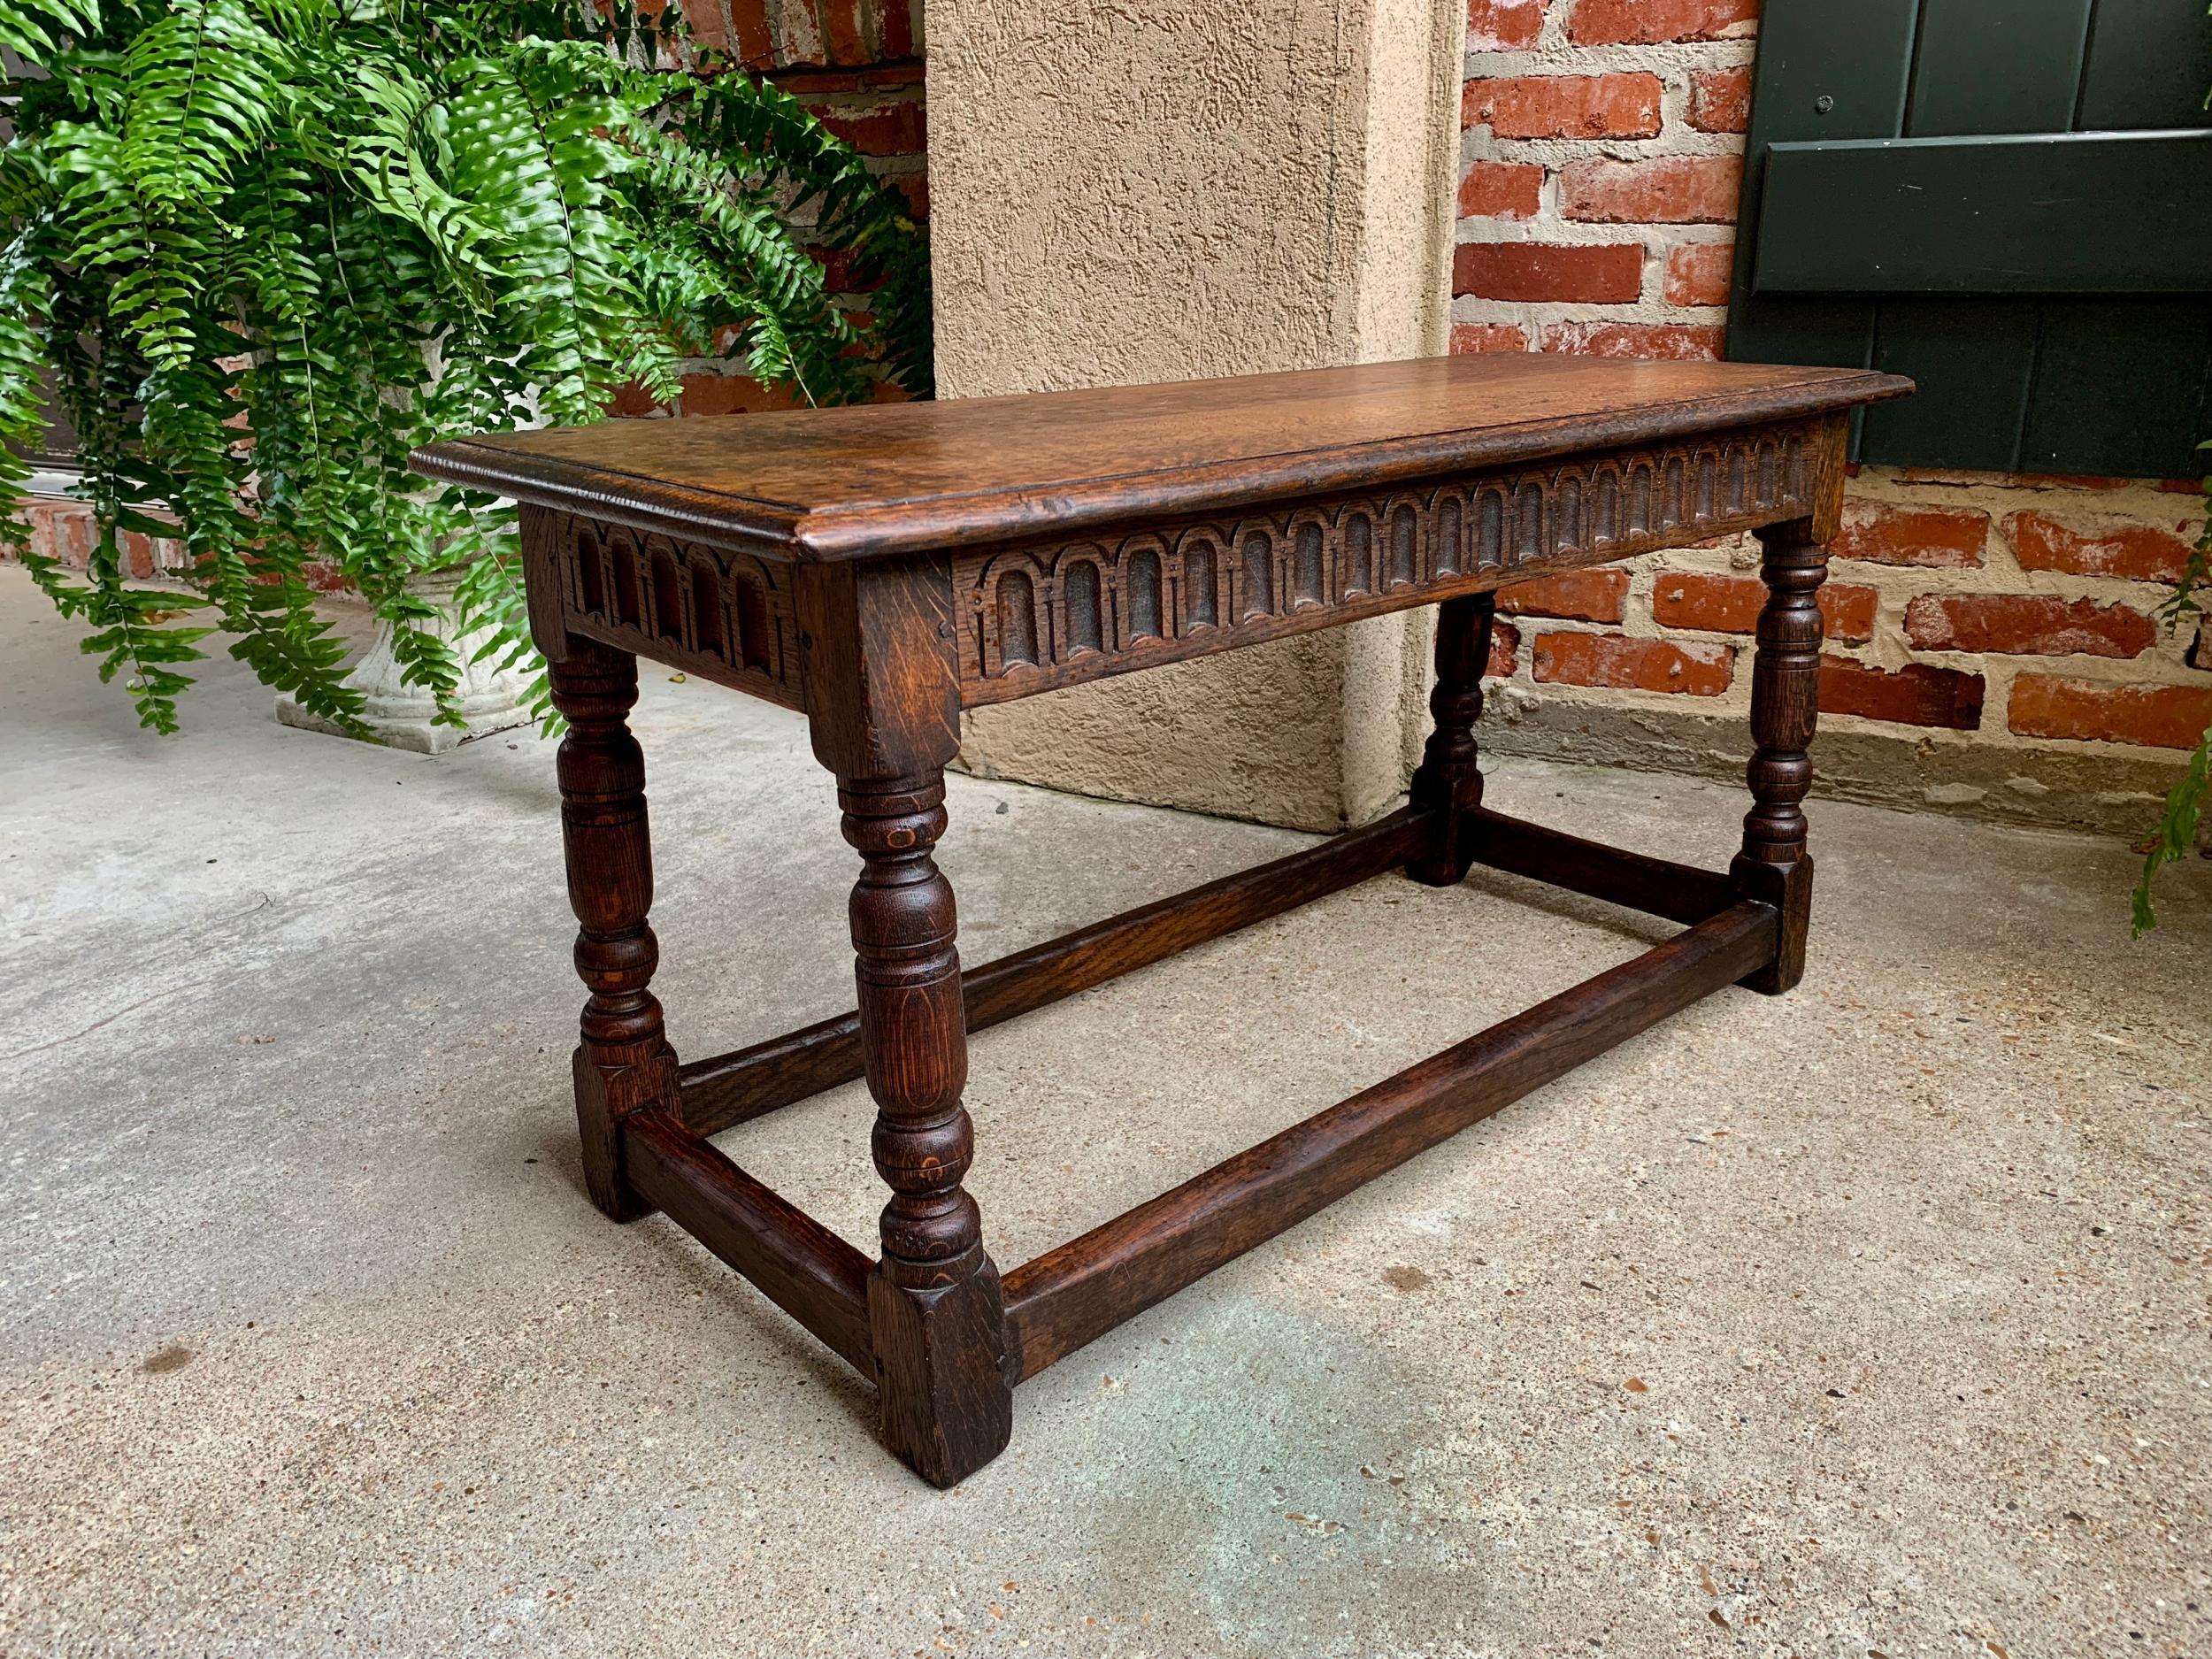 Jacobean Antique English Carved Oak Pegged Joint Stool Duet Bench Window Seat, c1900